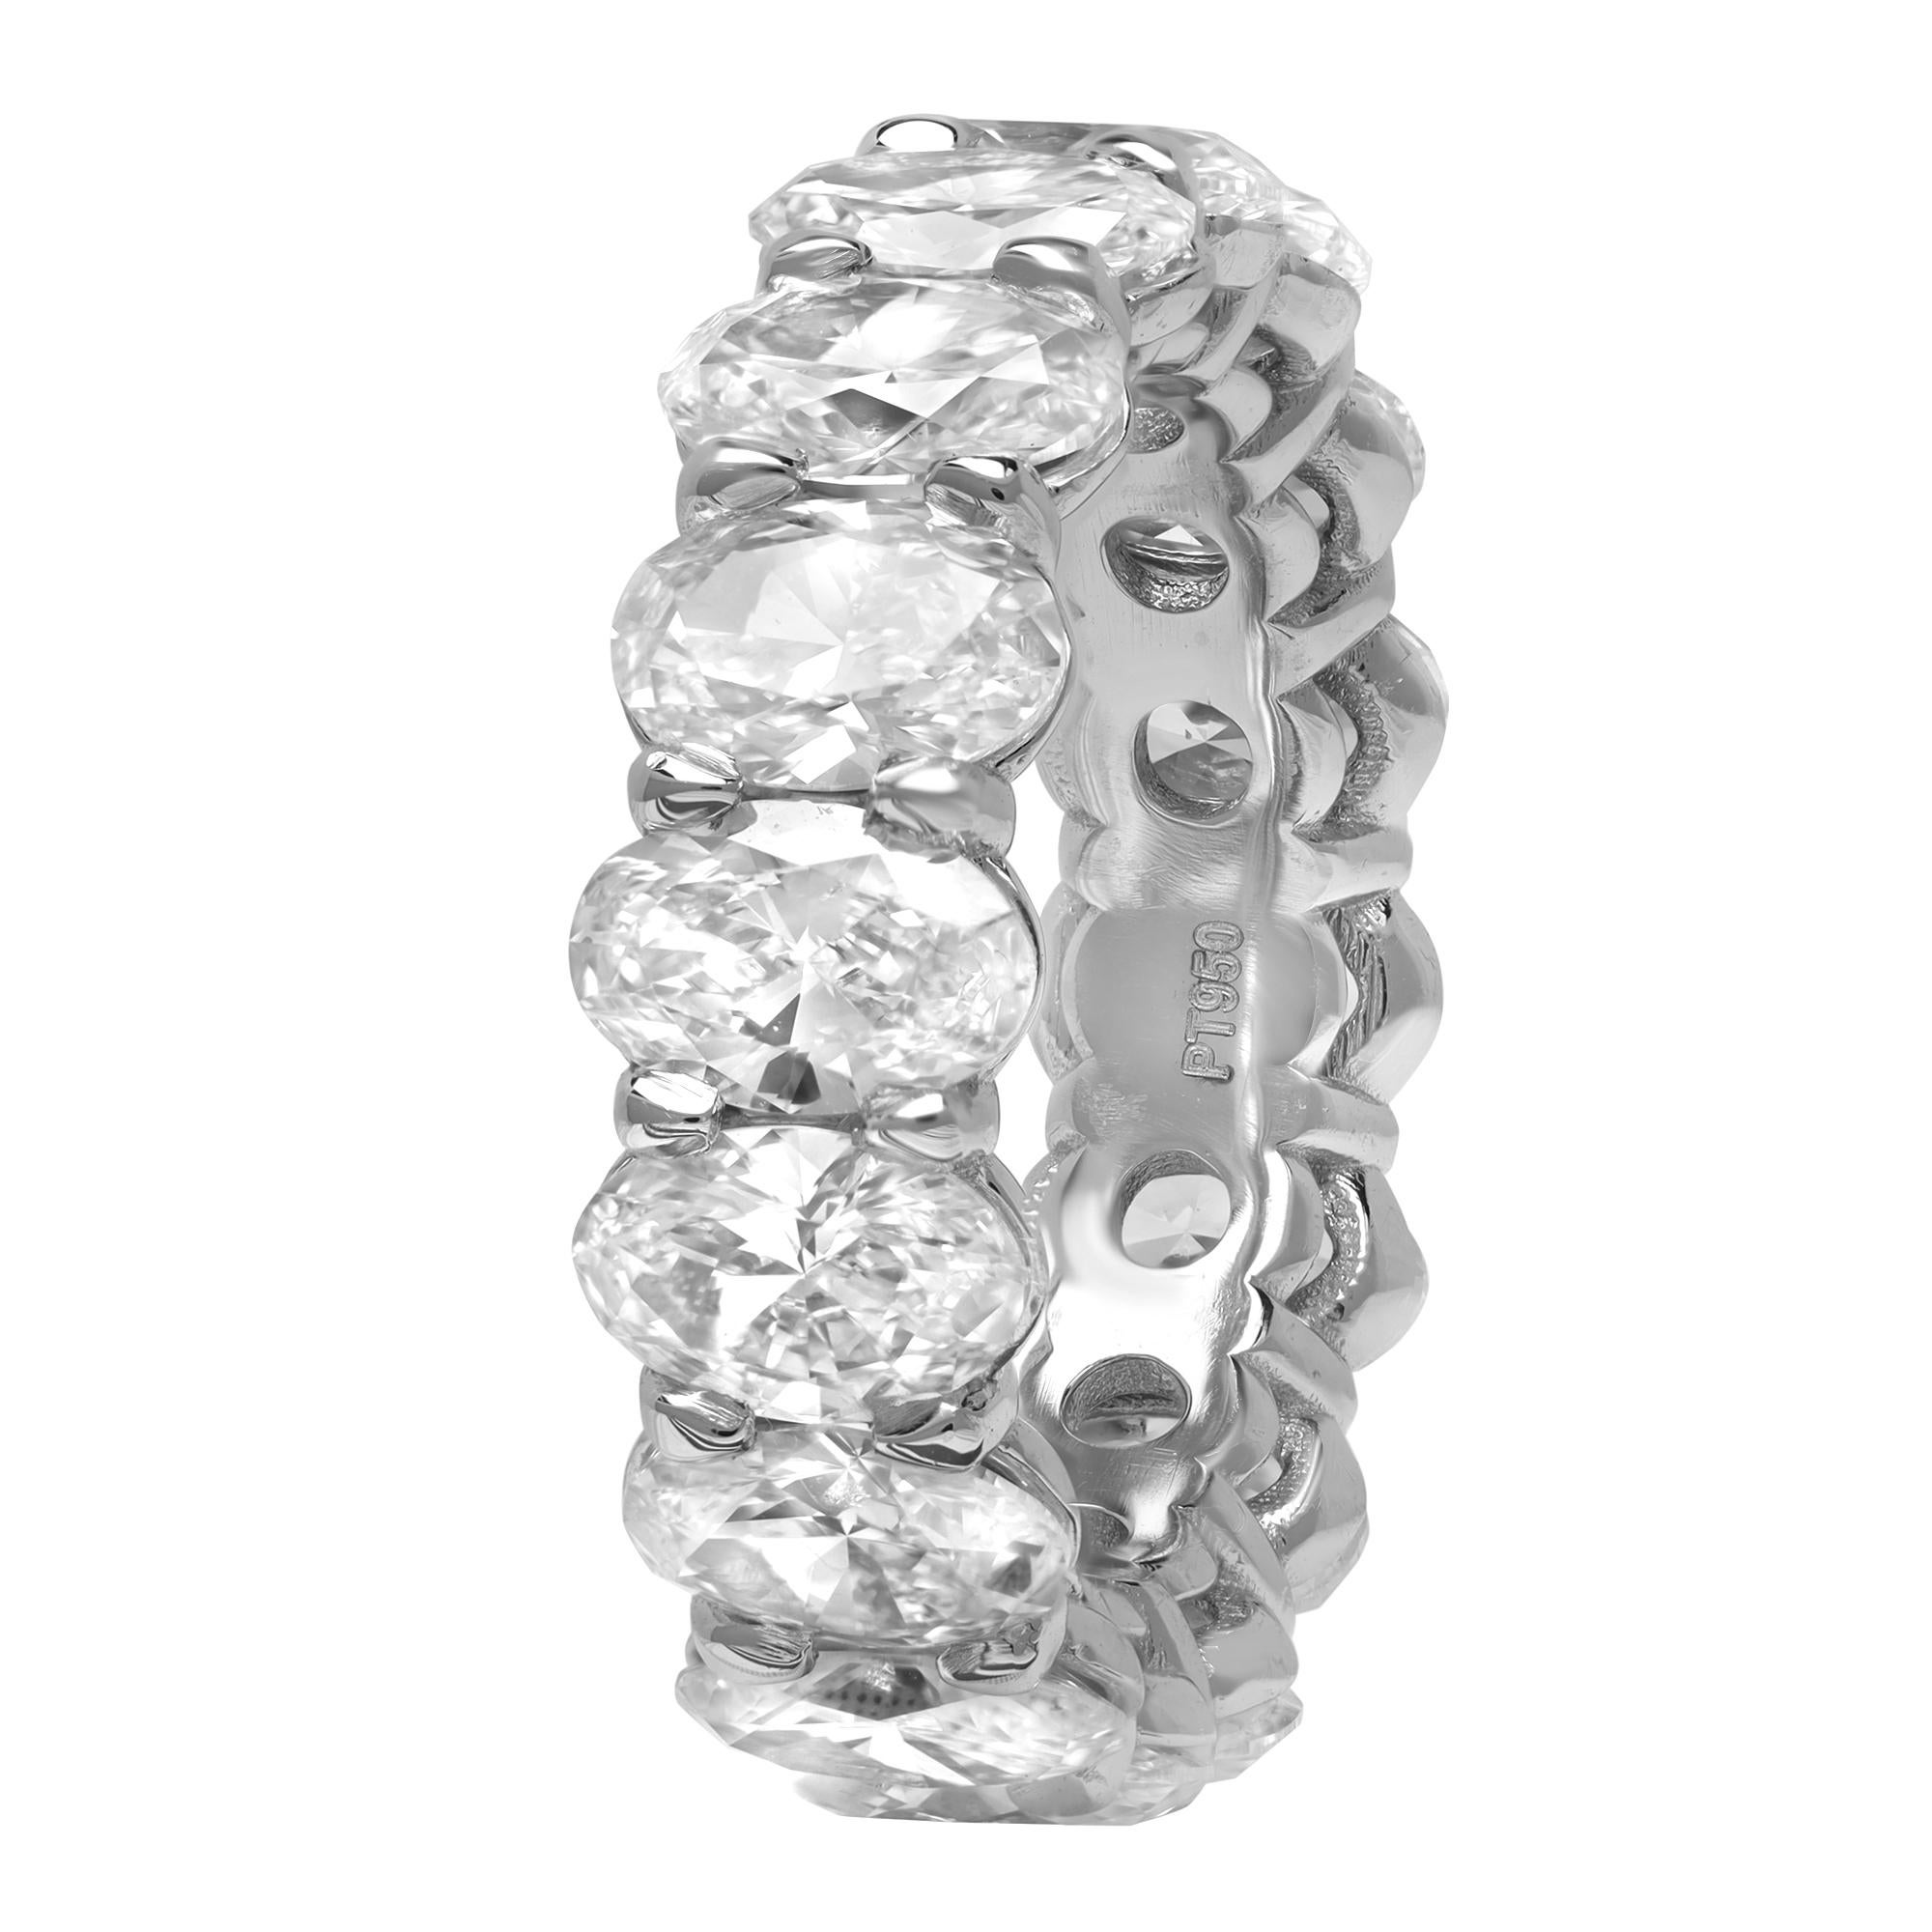 Rachel Koen Oval Diamond Eternity Band Ring Platinum 6.77cttw In New Condition For Sale In New York, NY